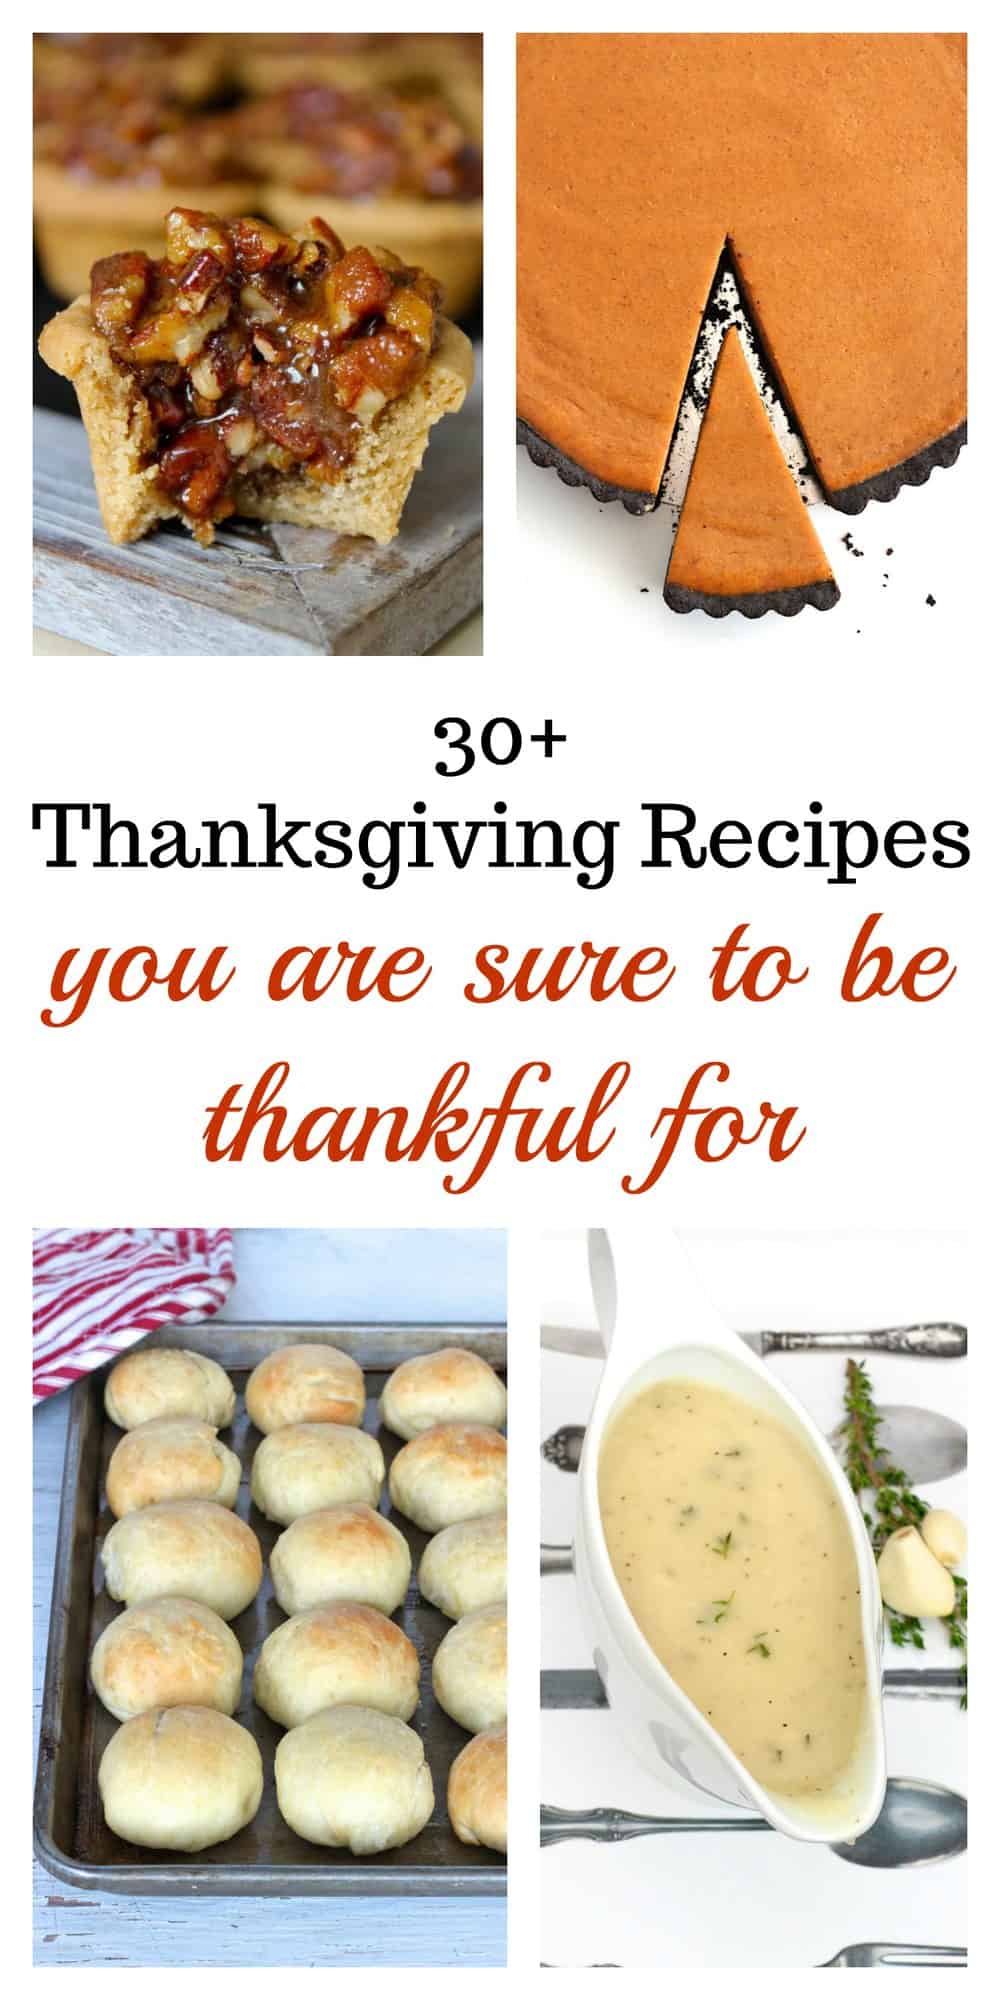 30+ Thanksgiving Recipes To Be Thankful For